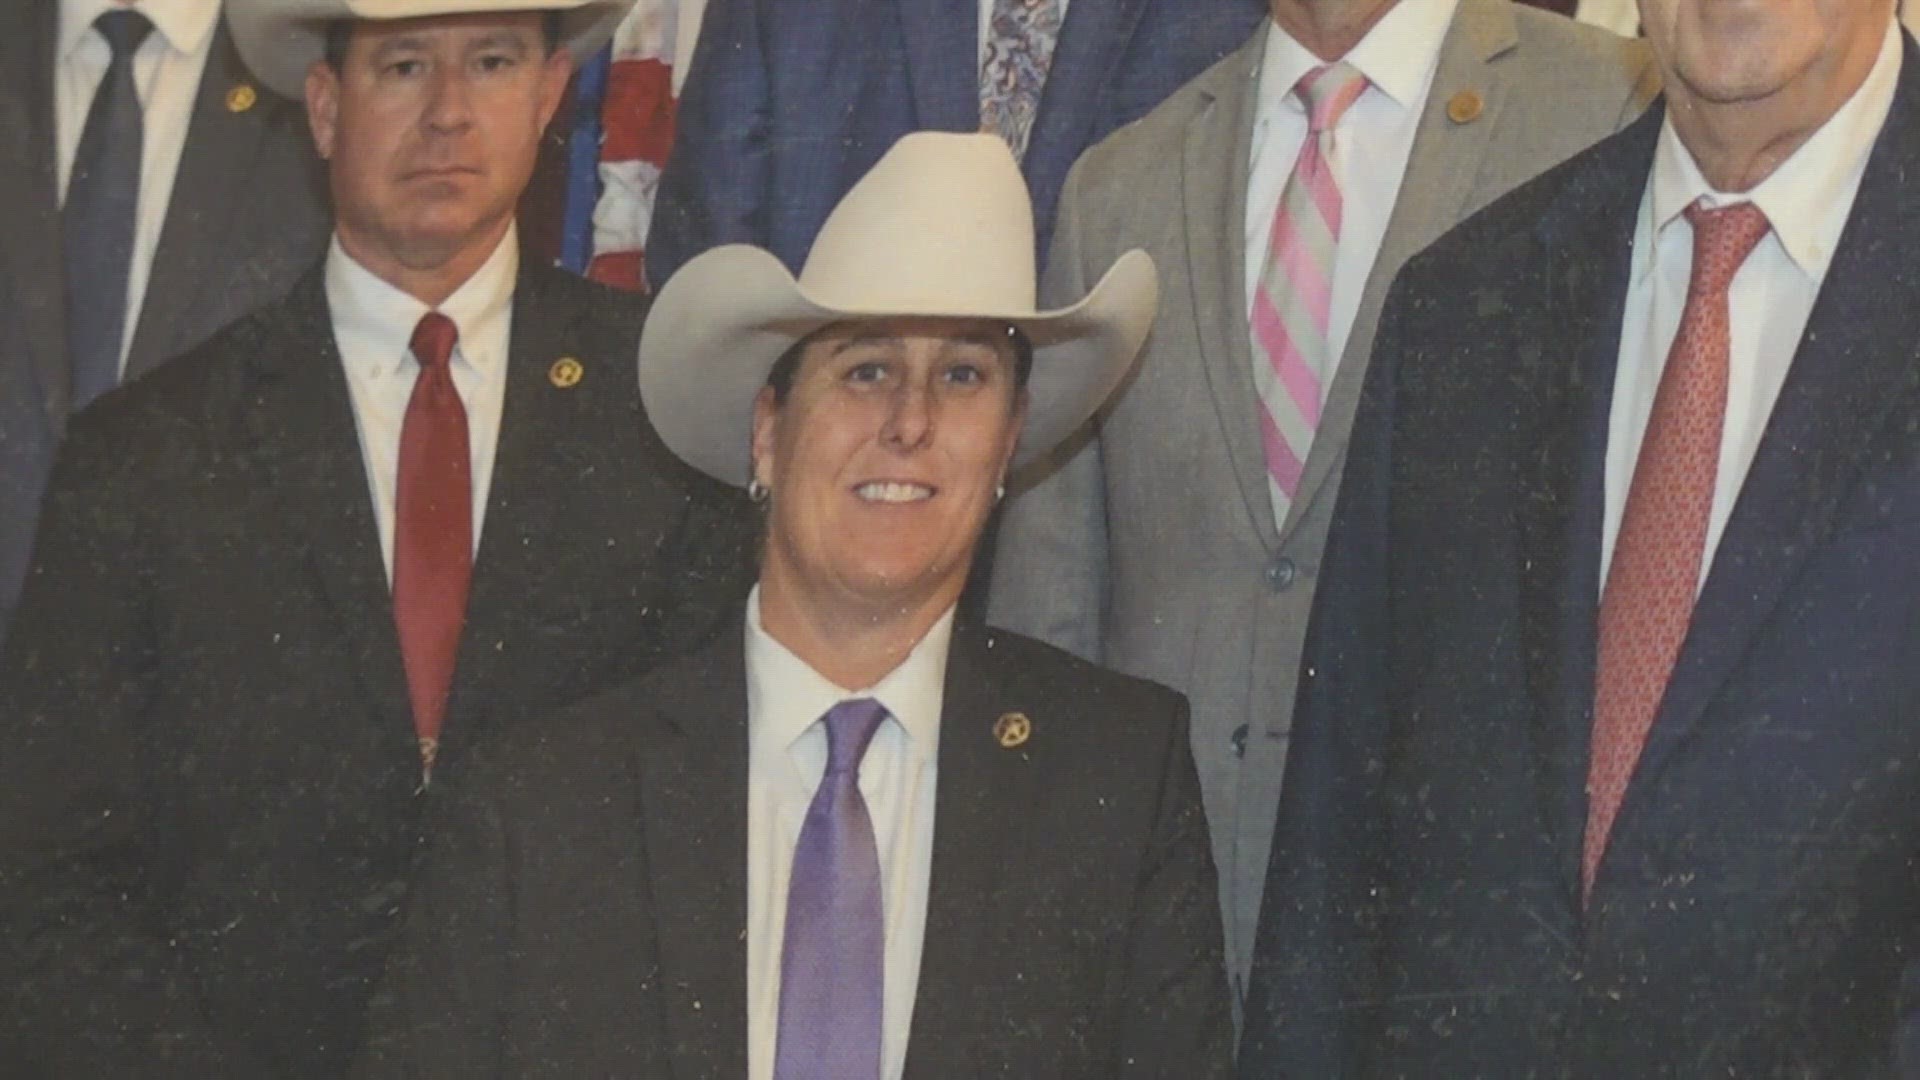 Wende O. Wakeman will serve as the Mejor for Texas Ranger Company F, stationed in Waco, Texas.